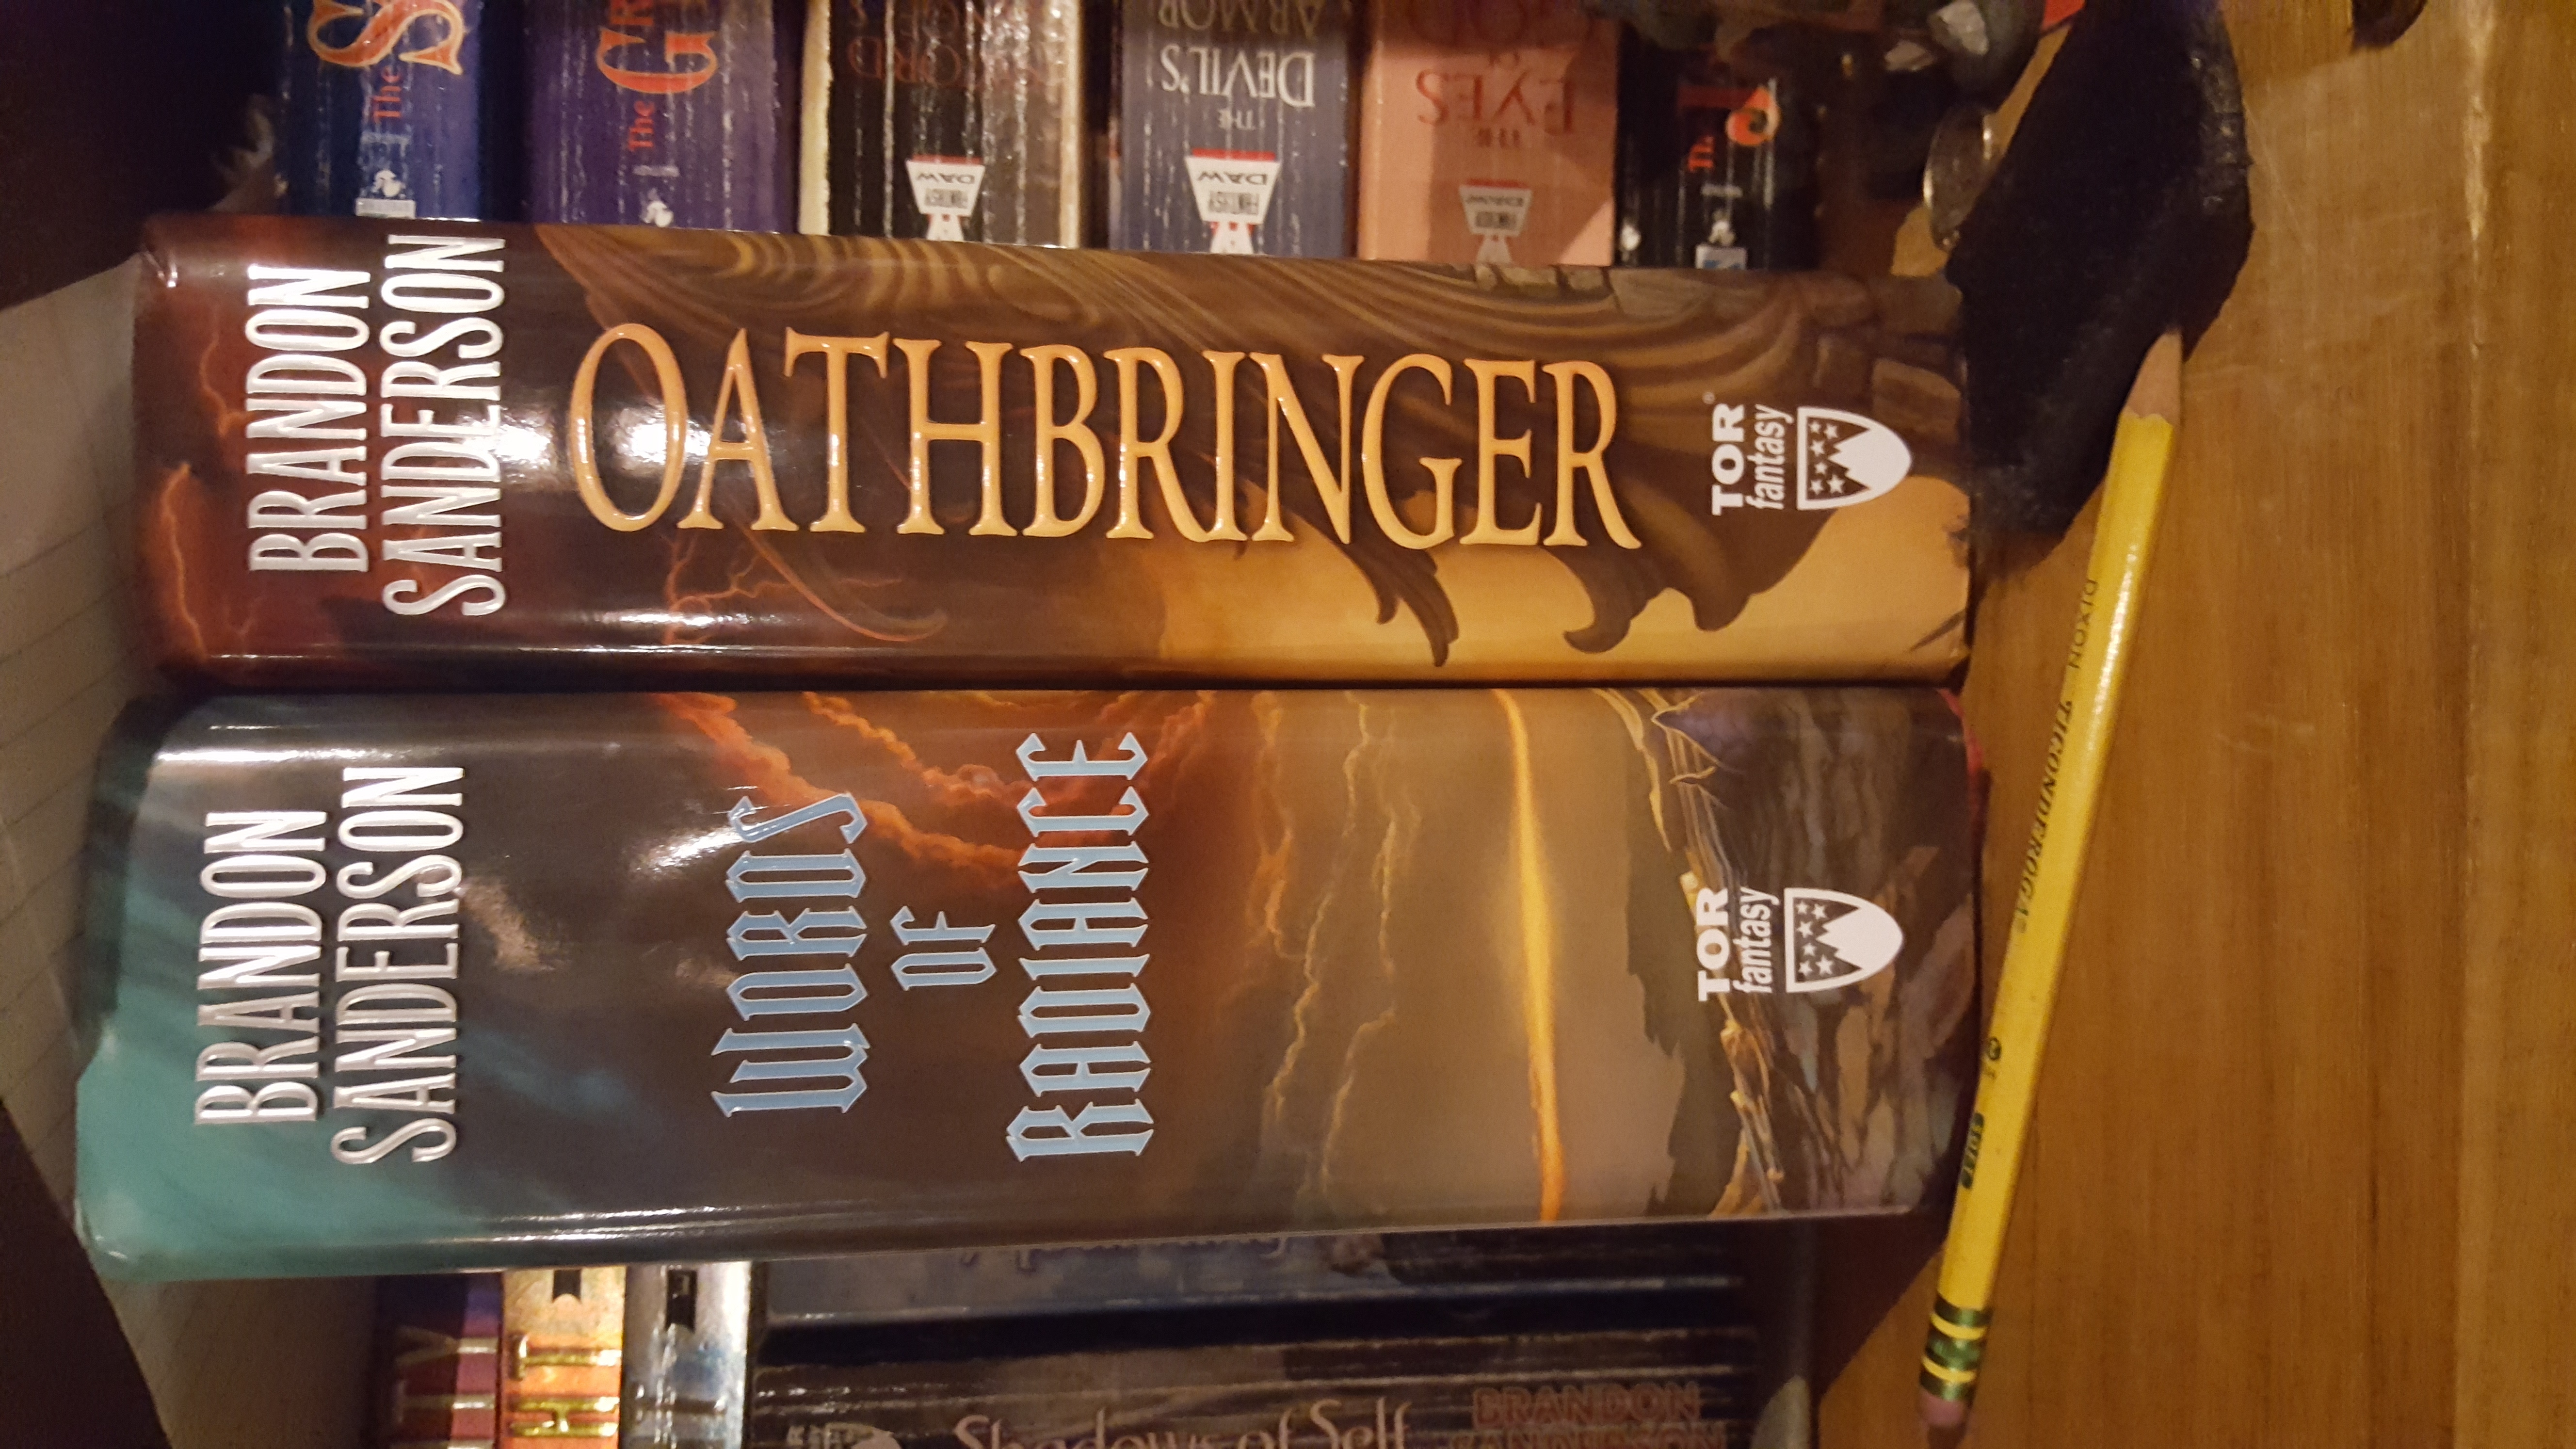 [OB] Oathbringer not as big as Words of Radiance - Stormlight Archive